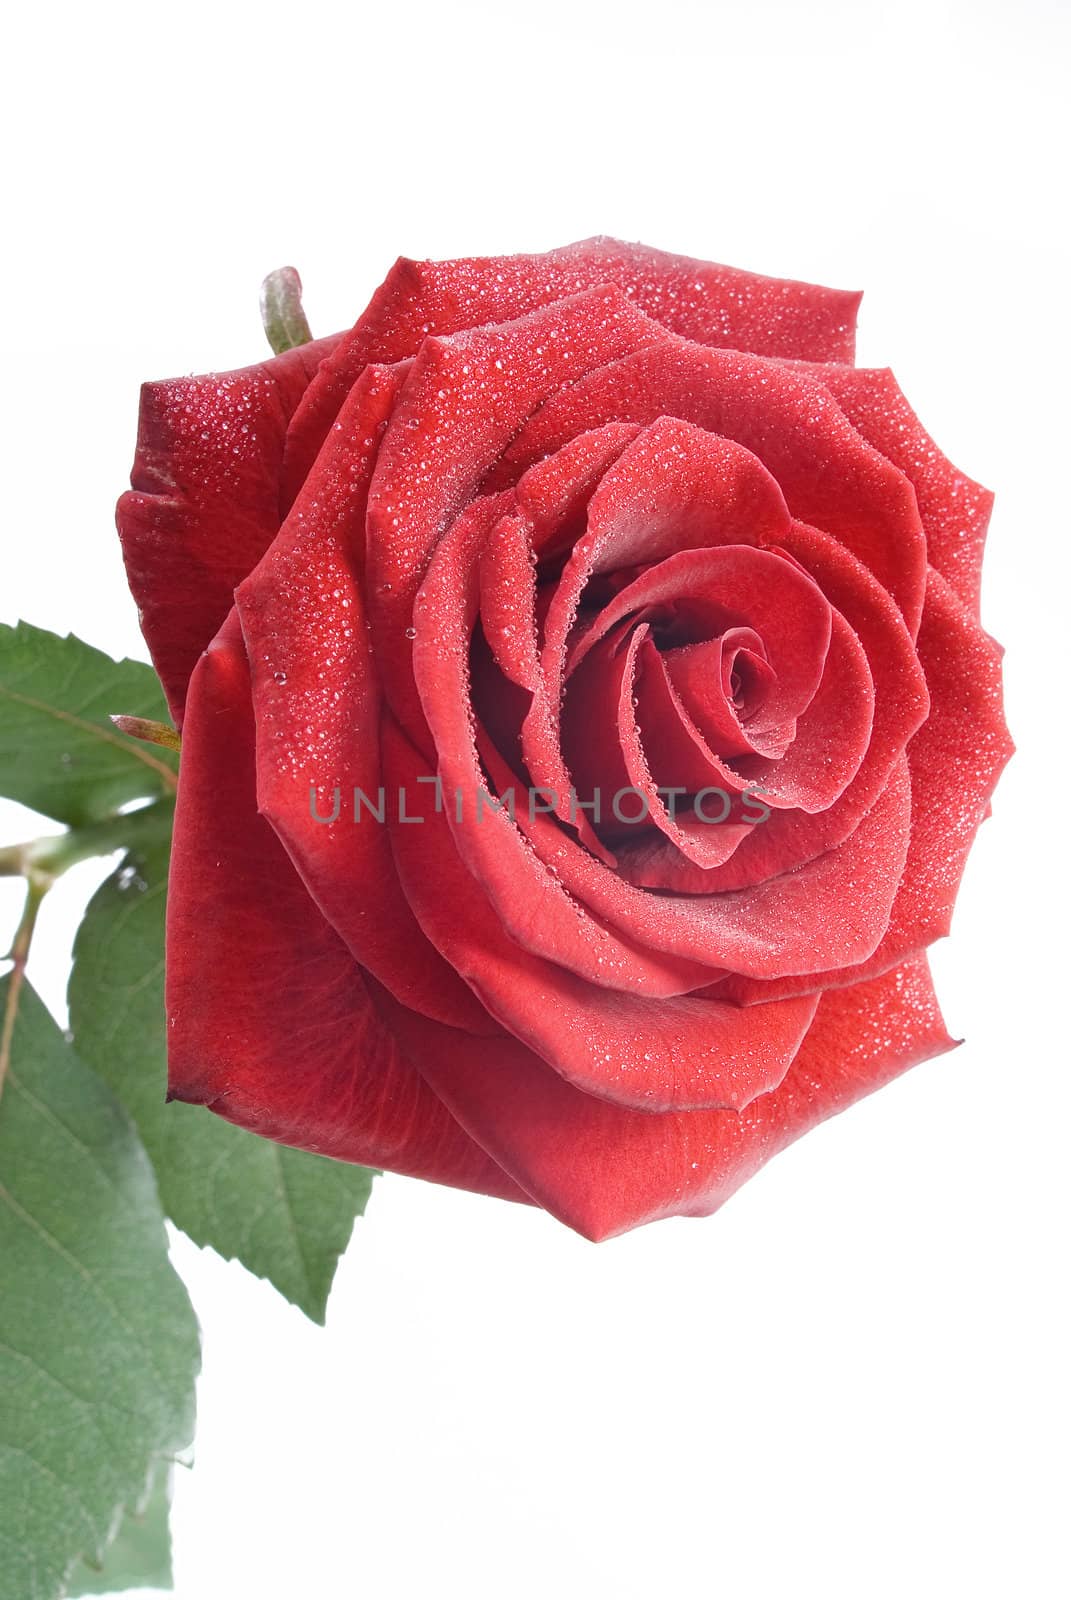 Red rose with drops of water on the white background